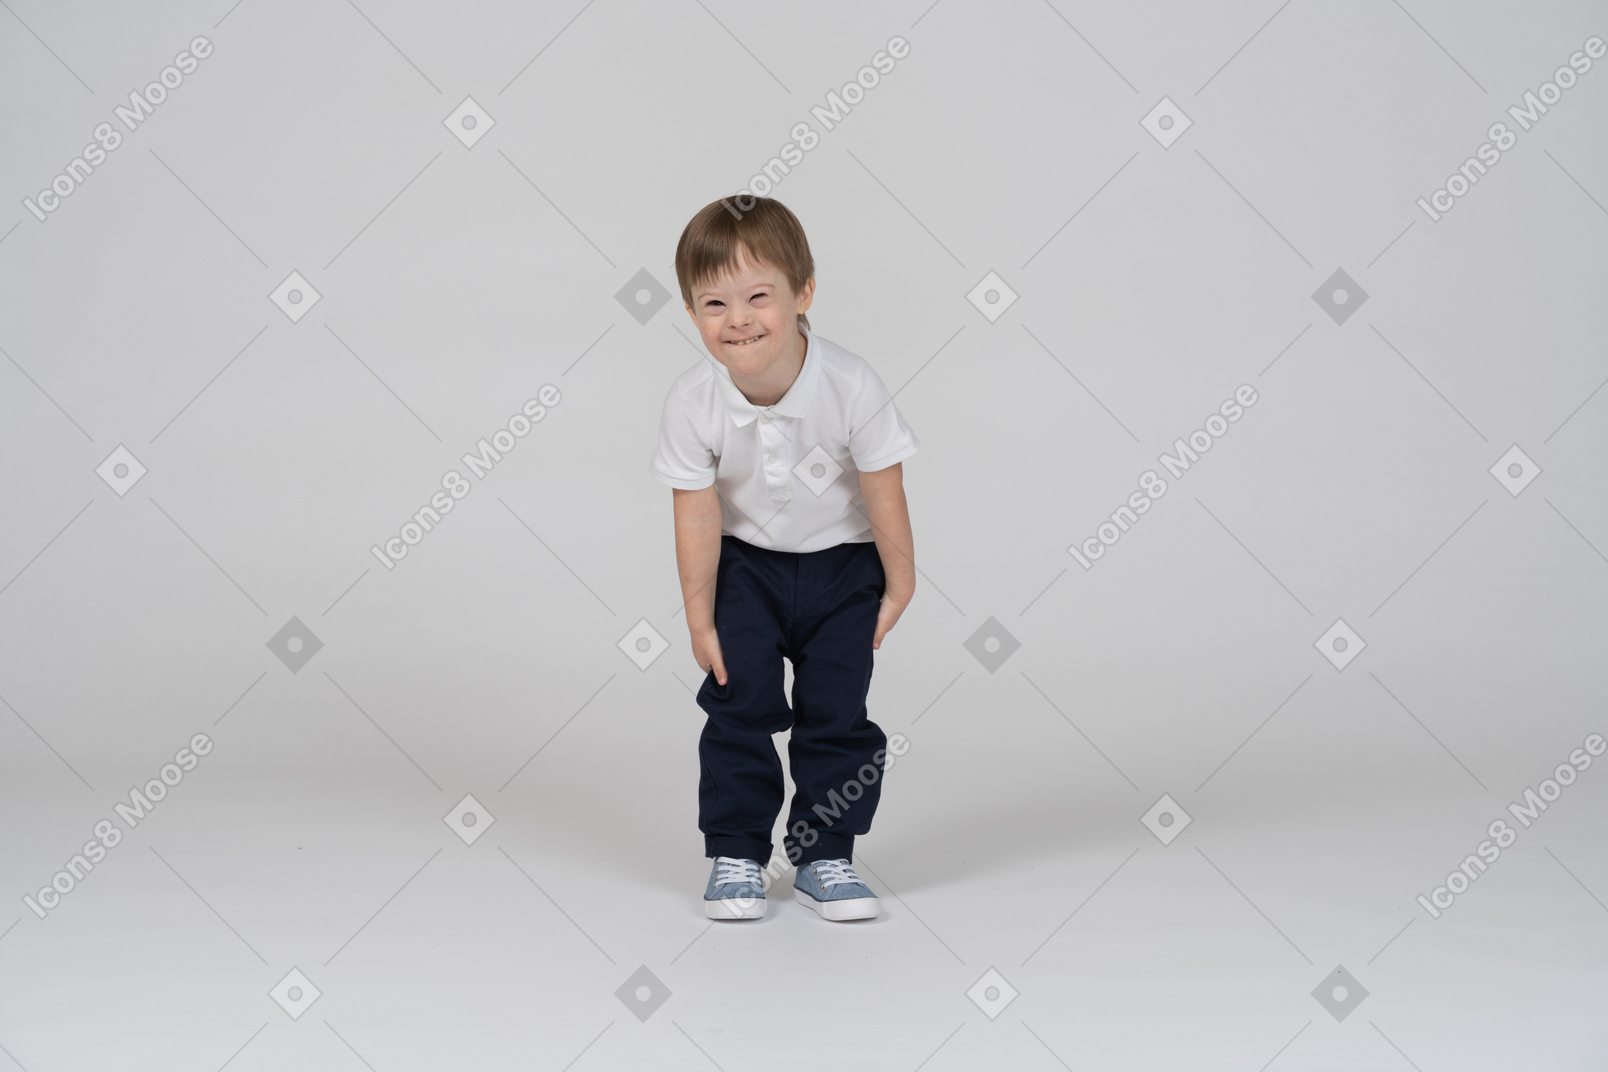 Smiling boy standing and leaning forward